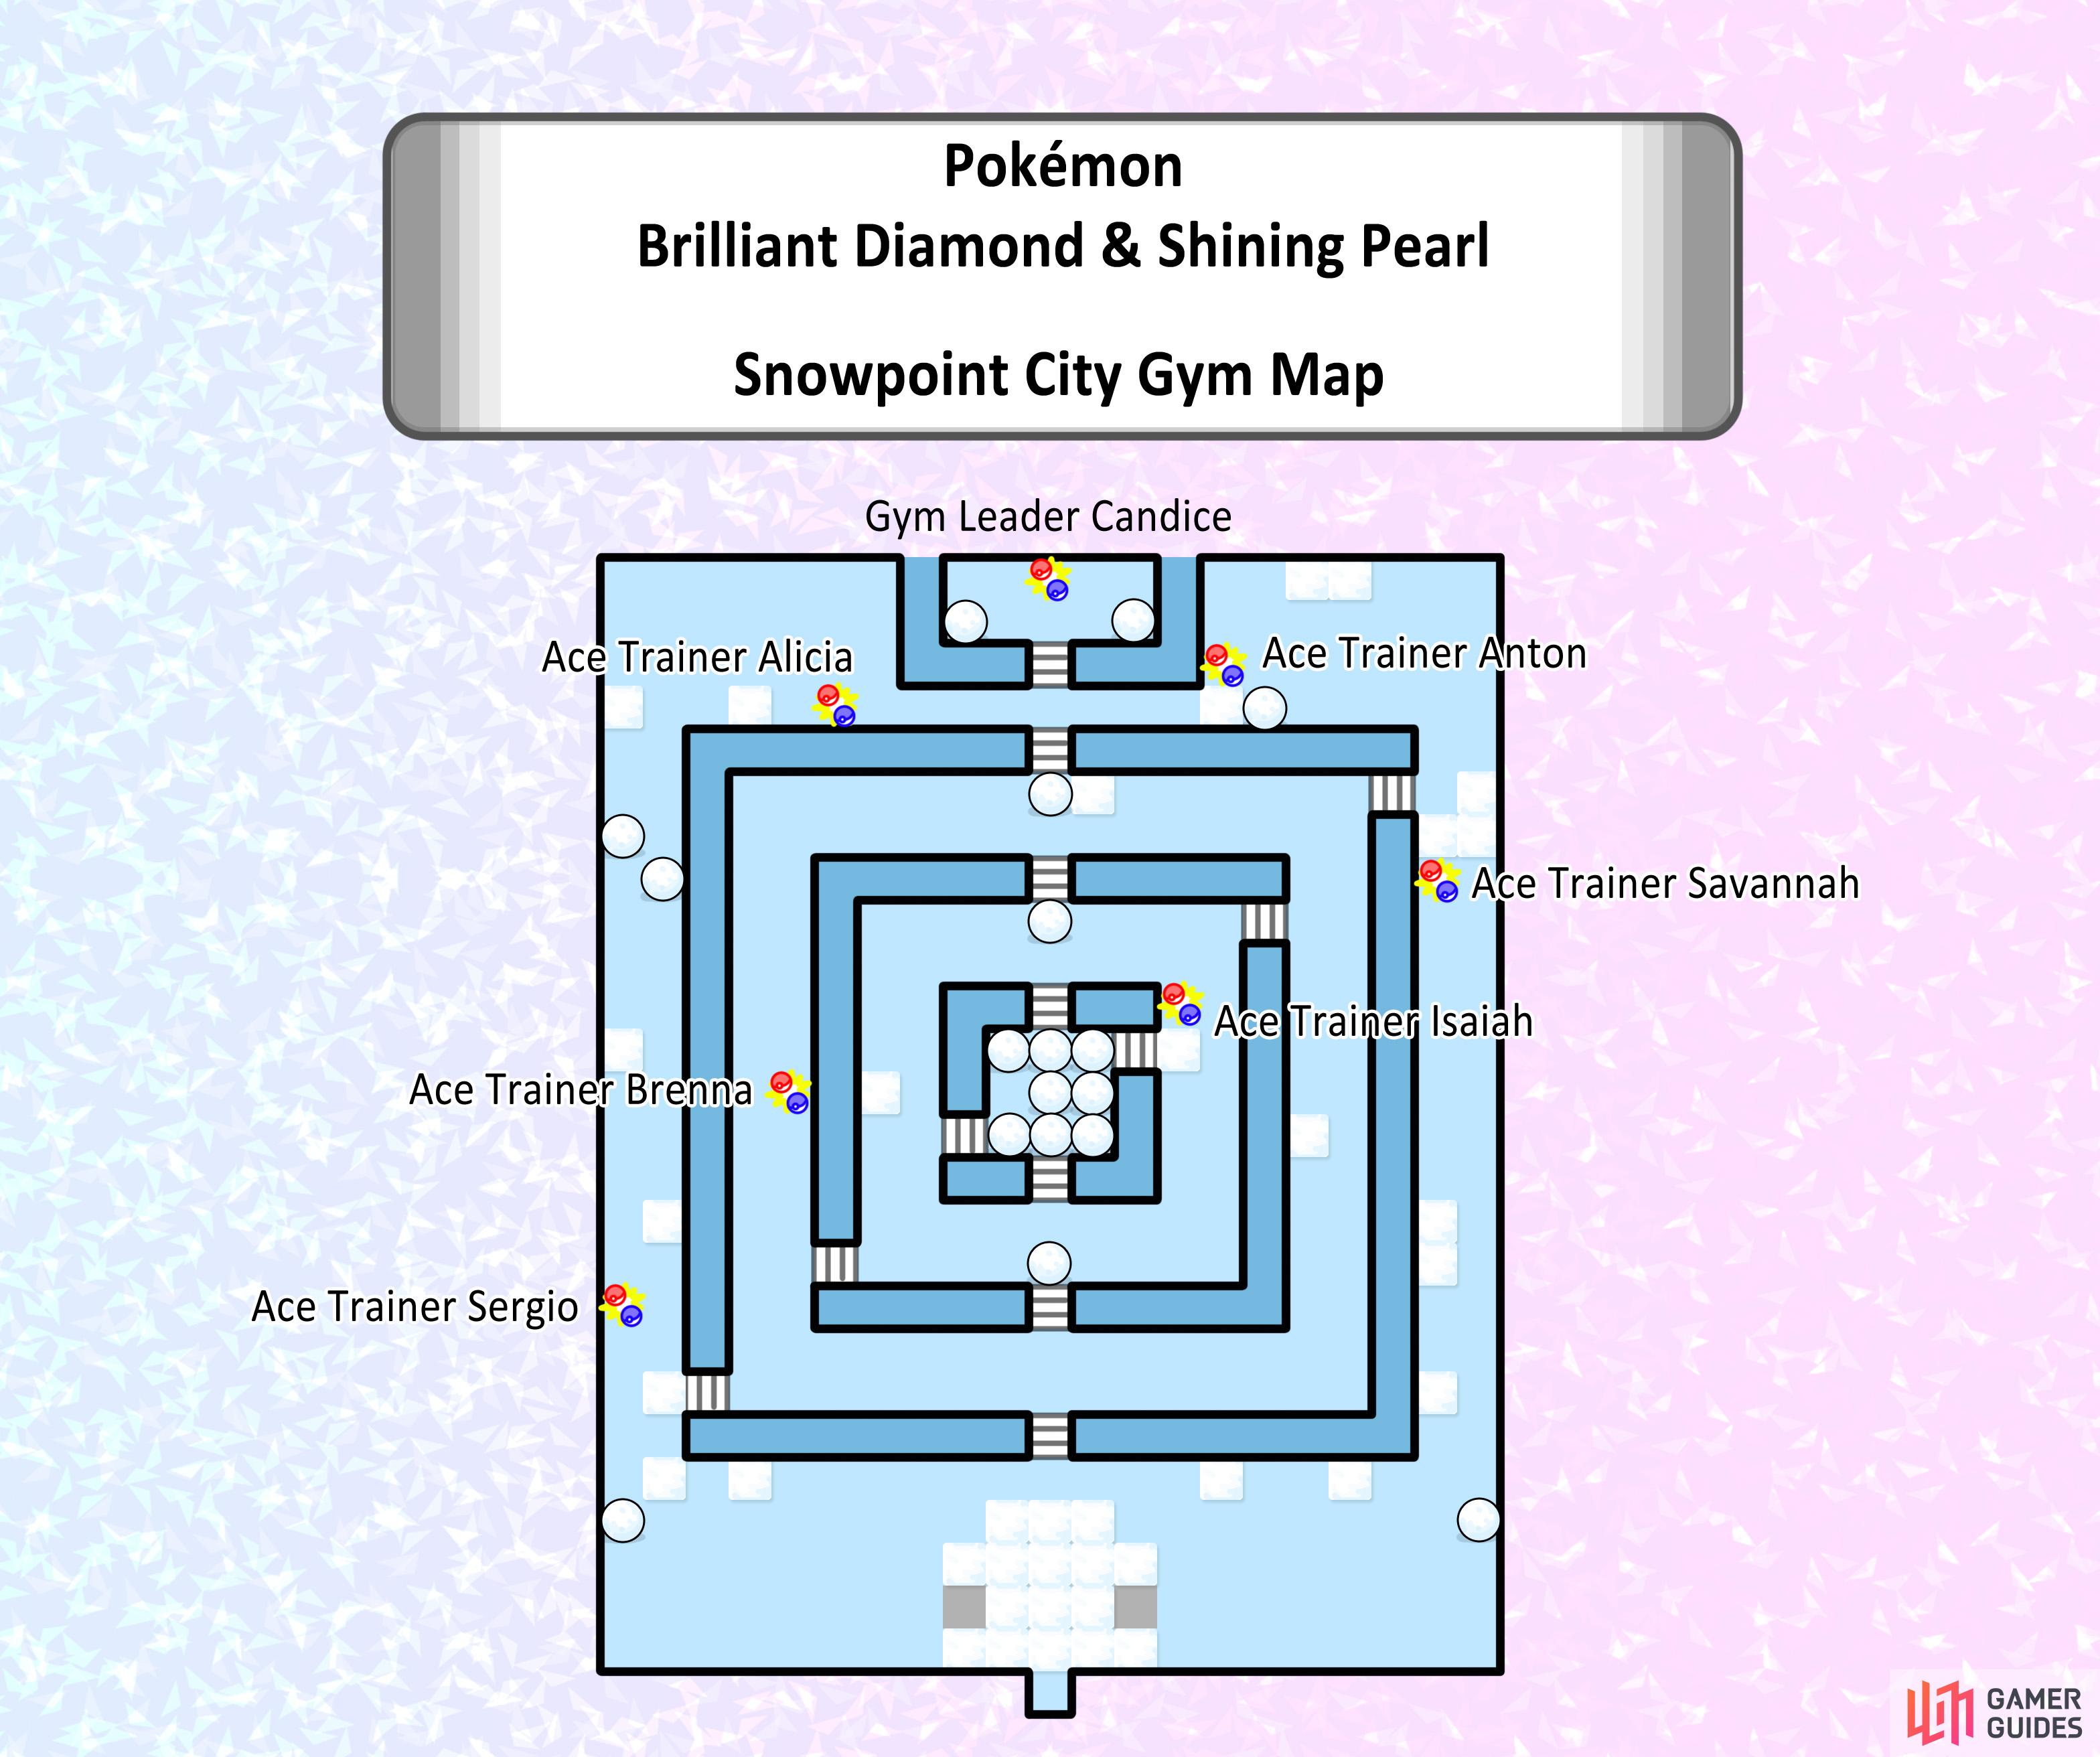 Snowpoint City Gym map.